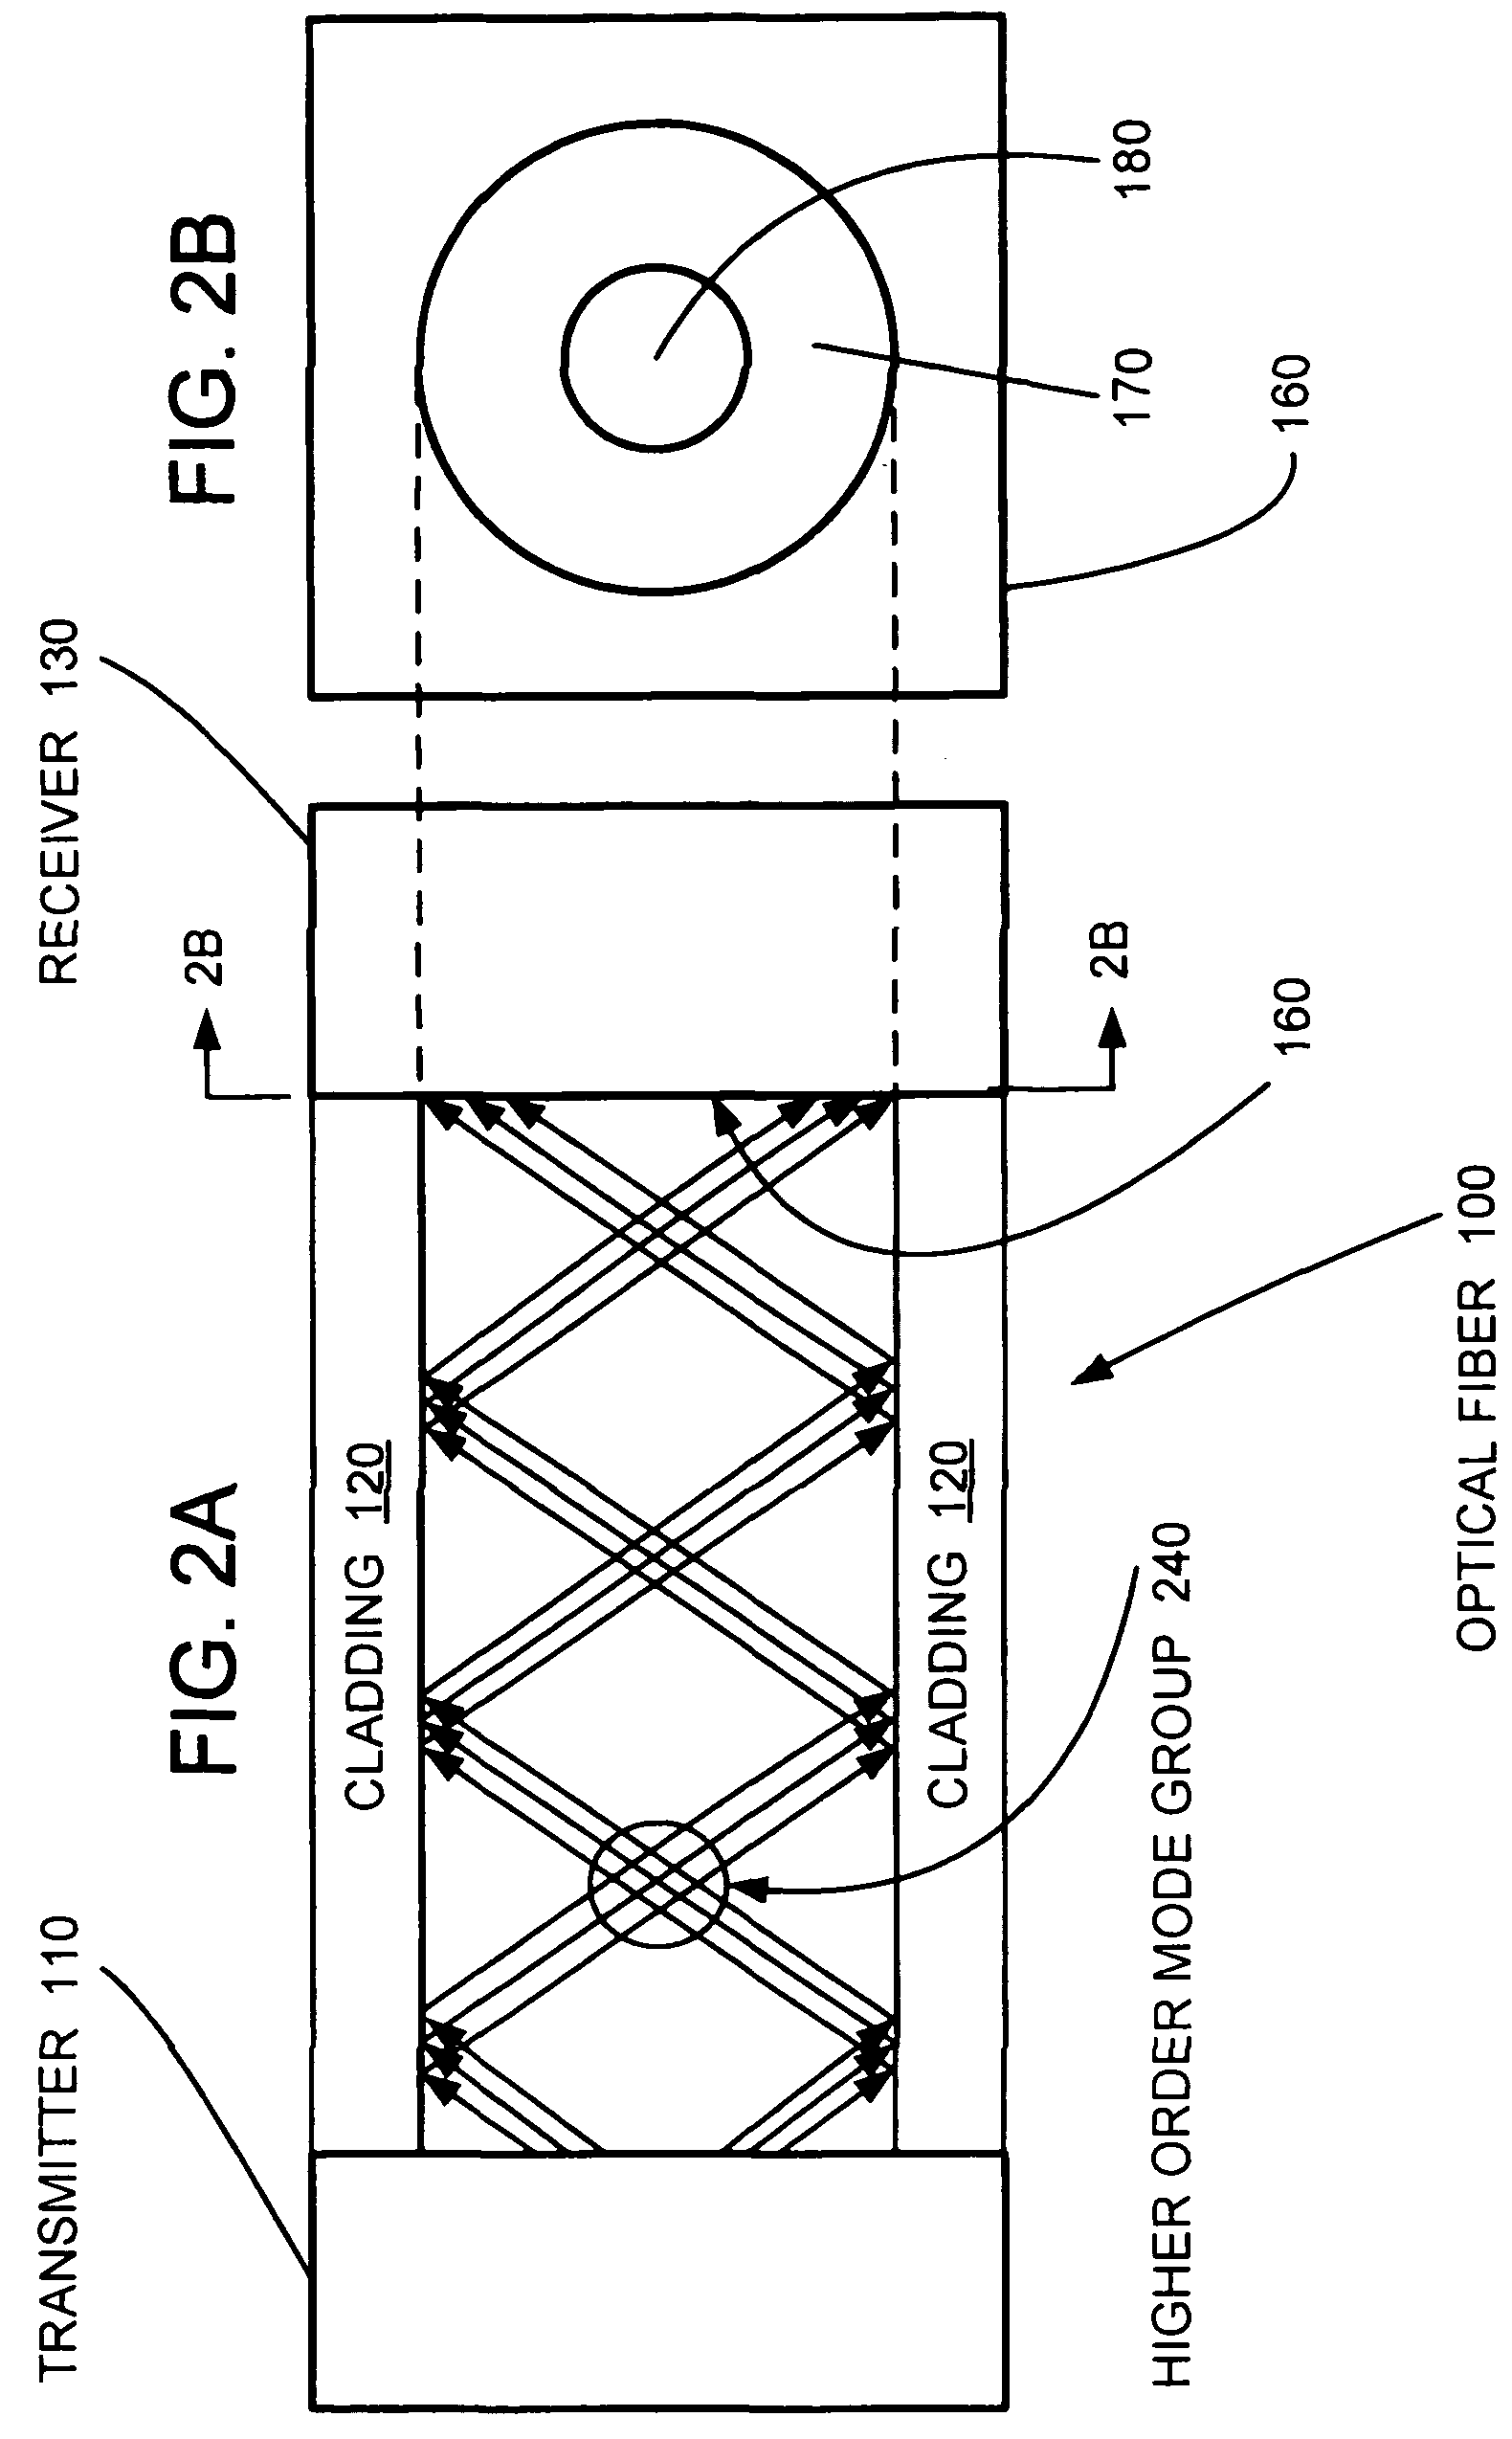 Photodiode with fiber mode dispersion compensation